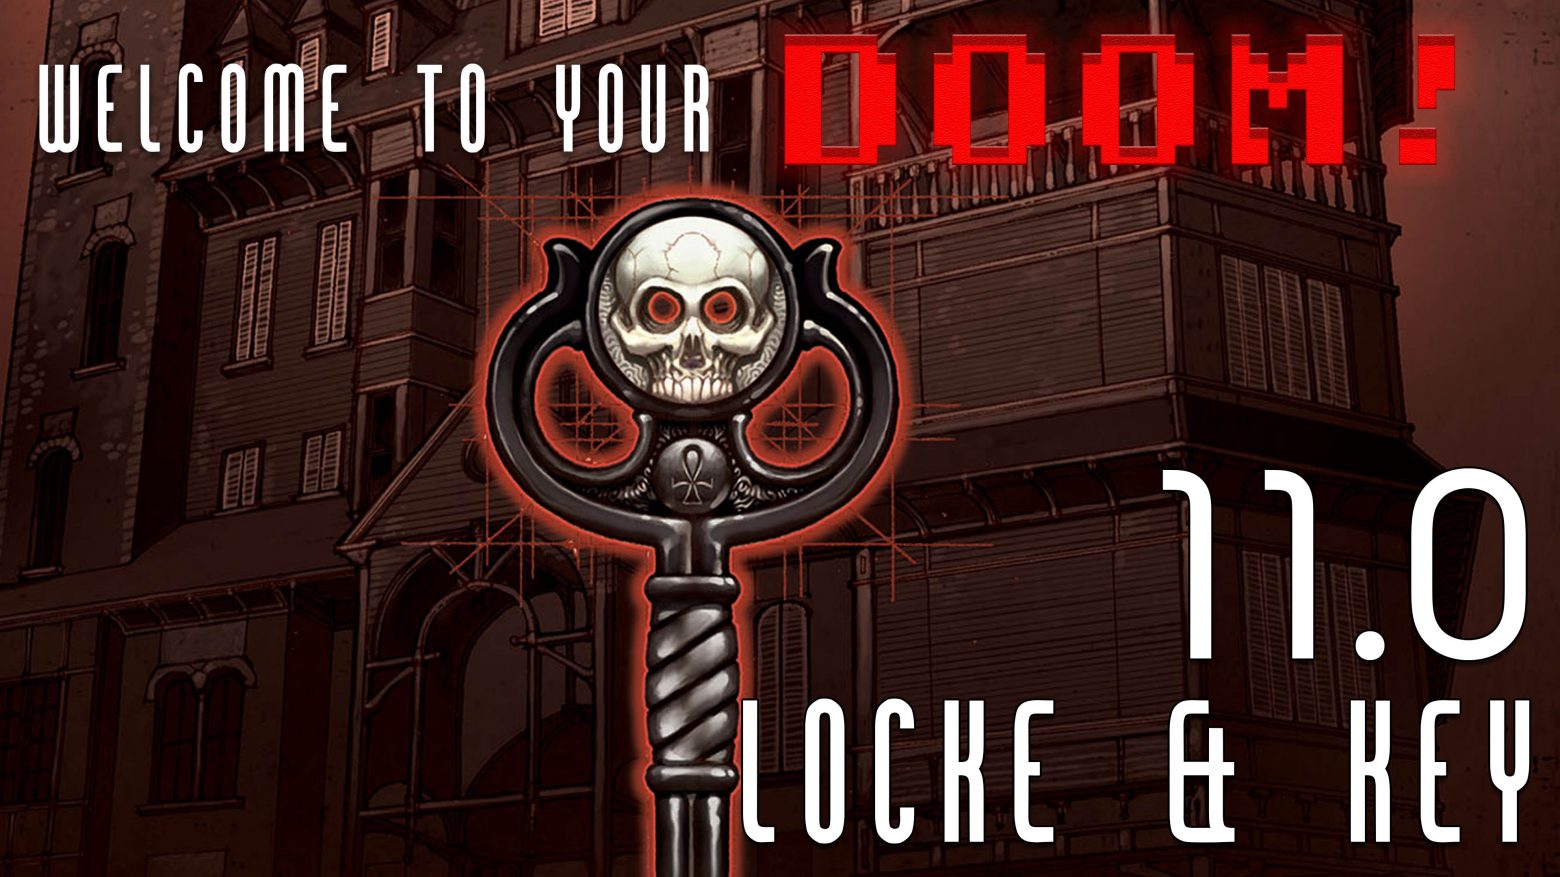 Locke and Key by Joe Hill - Welcome to your Doom Show - Episode 111560 x 877